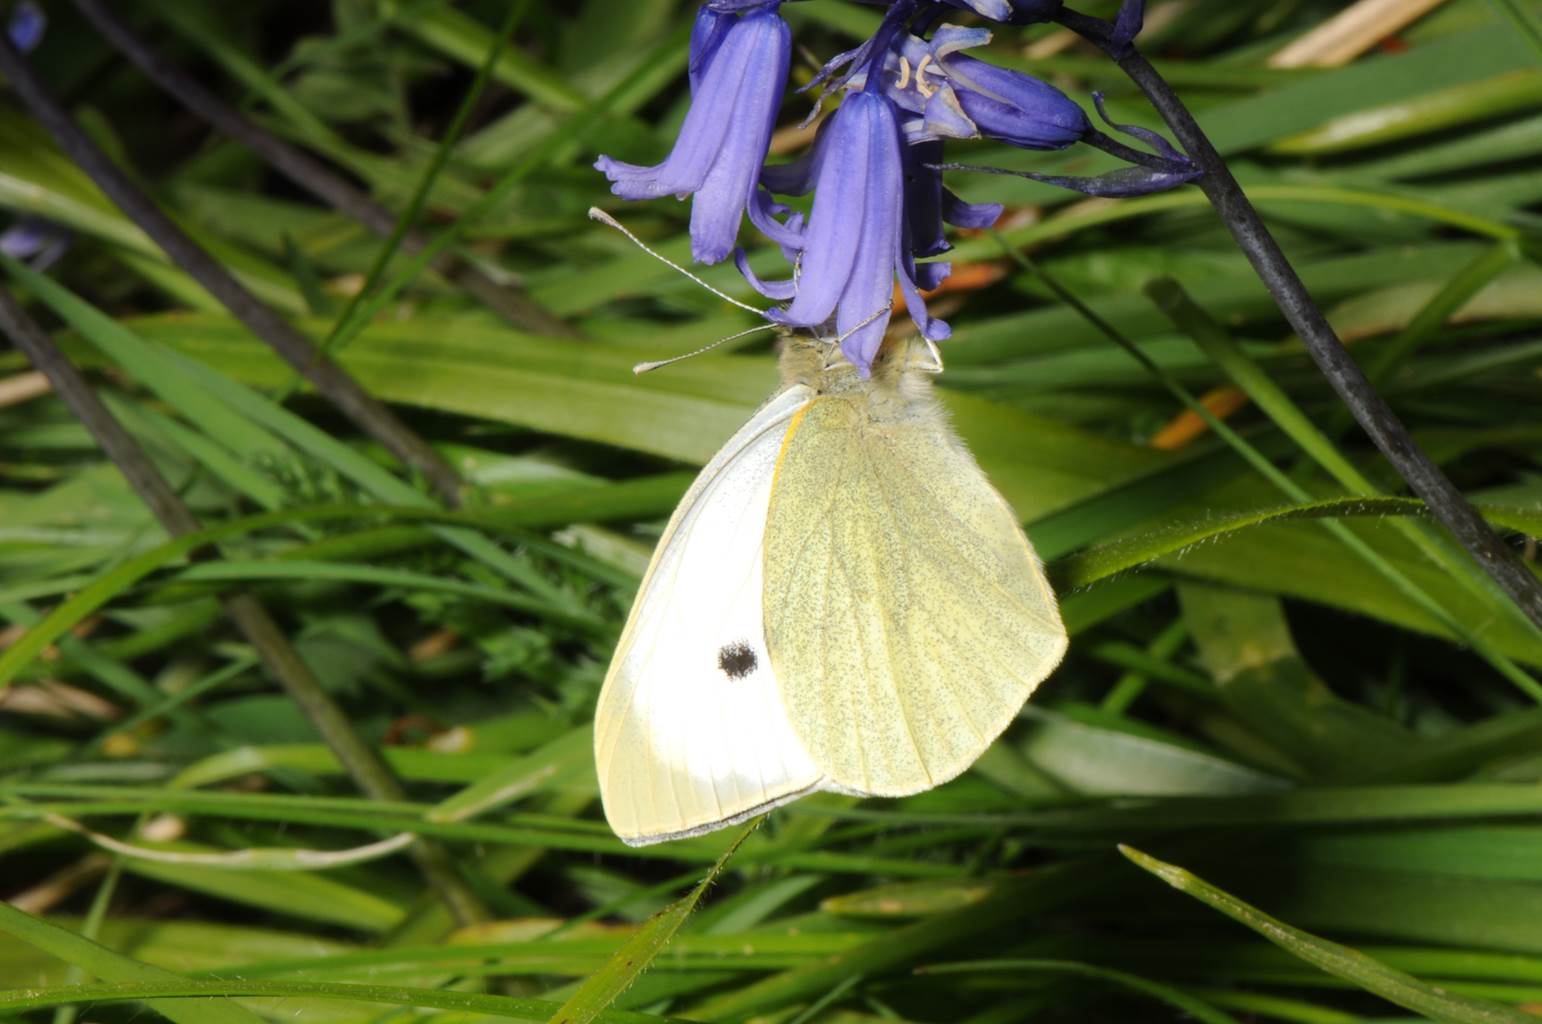 A white butterfly on a flower

Description automatically generated with medium confidence